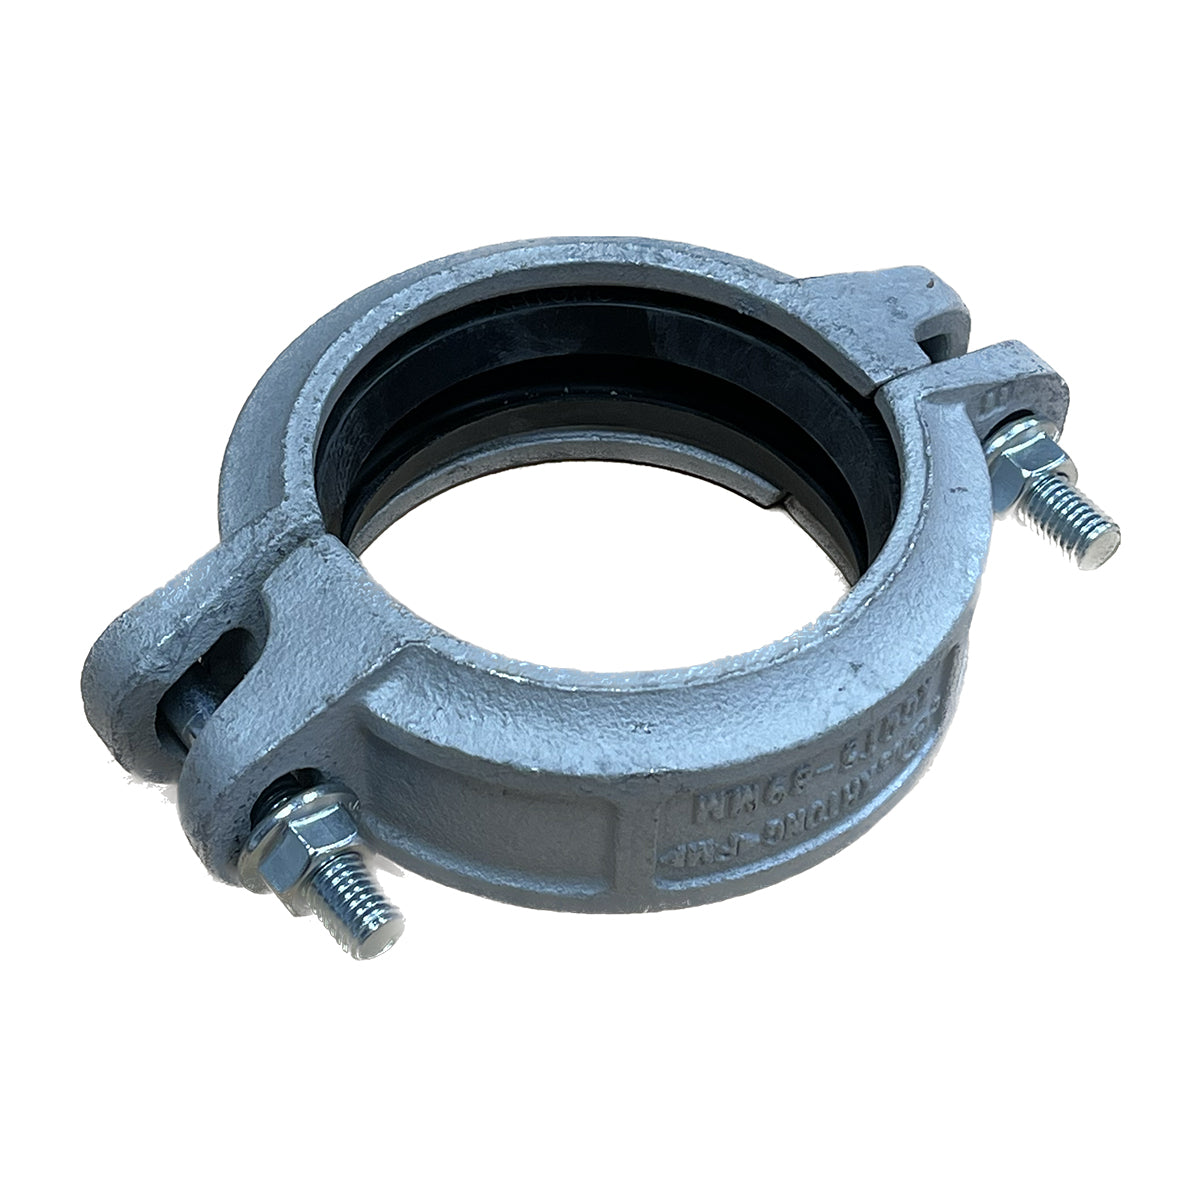 80mm Galvanised roll groove coupling - Premium Roll Groove Couplings from Wolf - Shop now at Firebox Australia